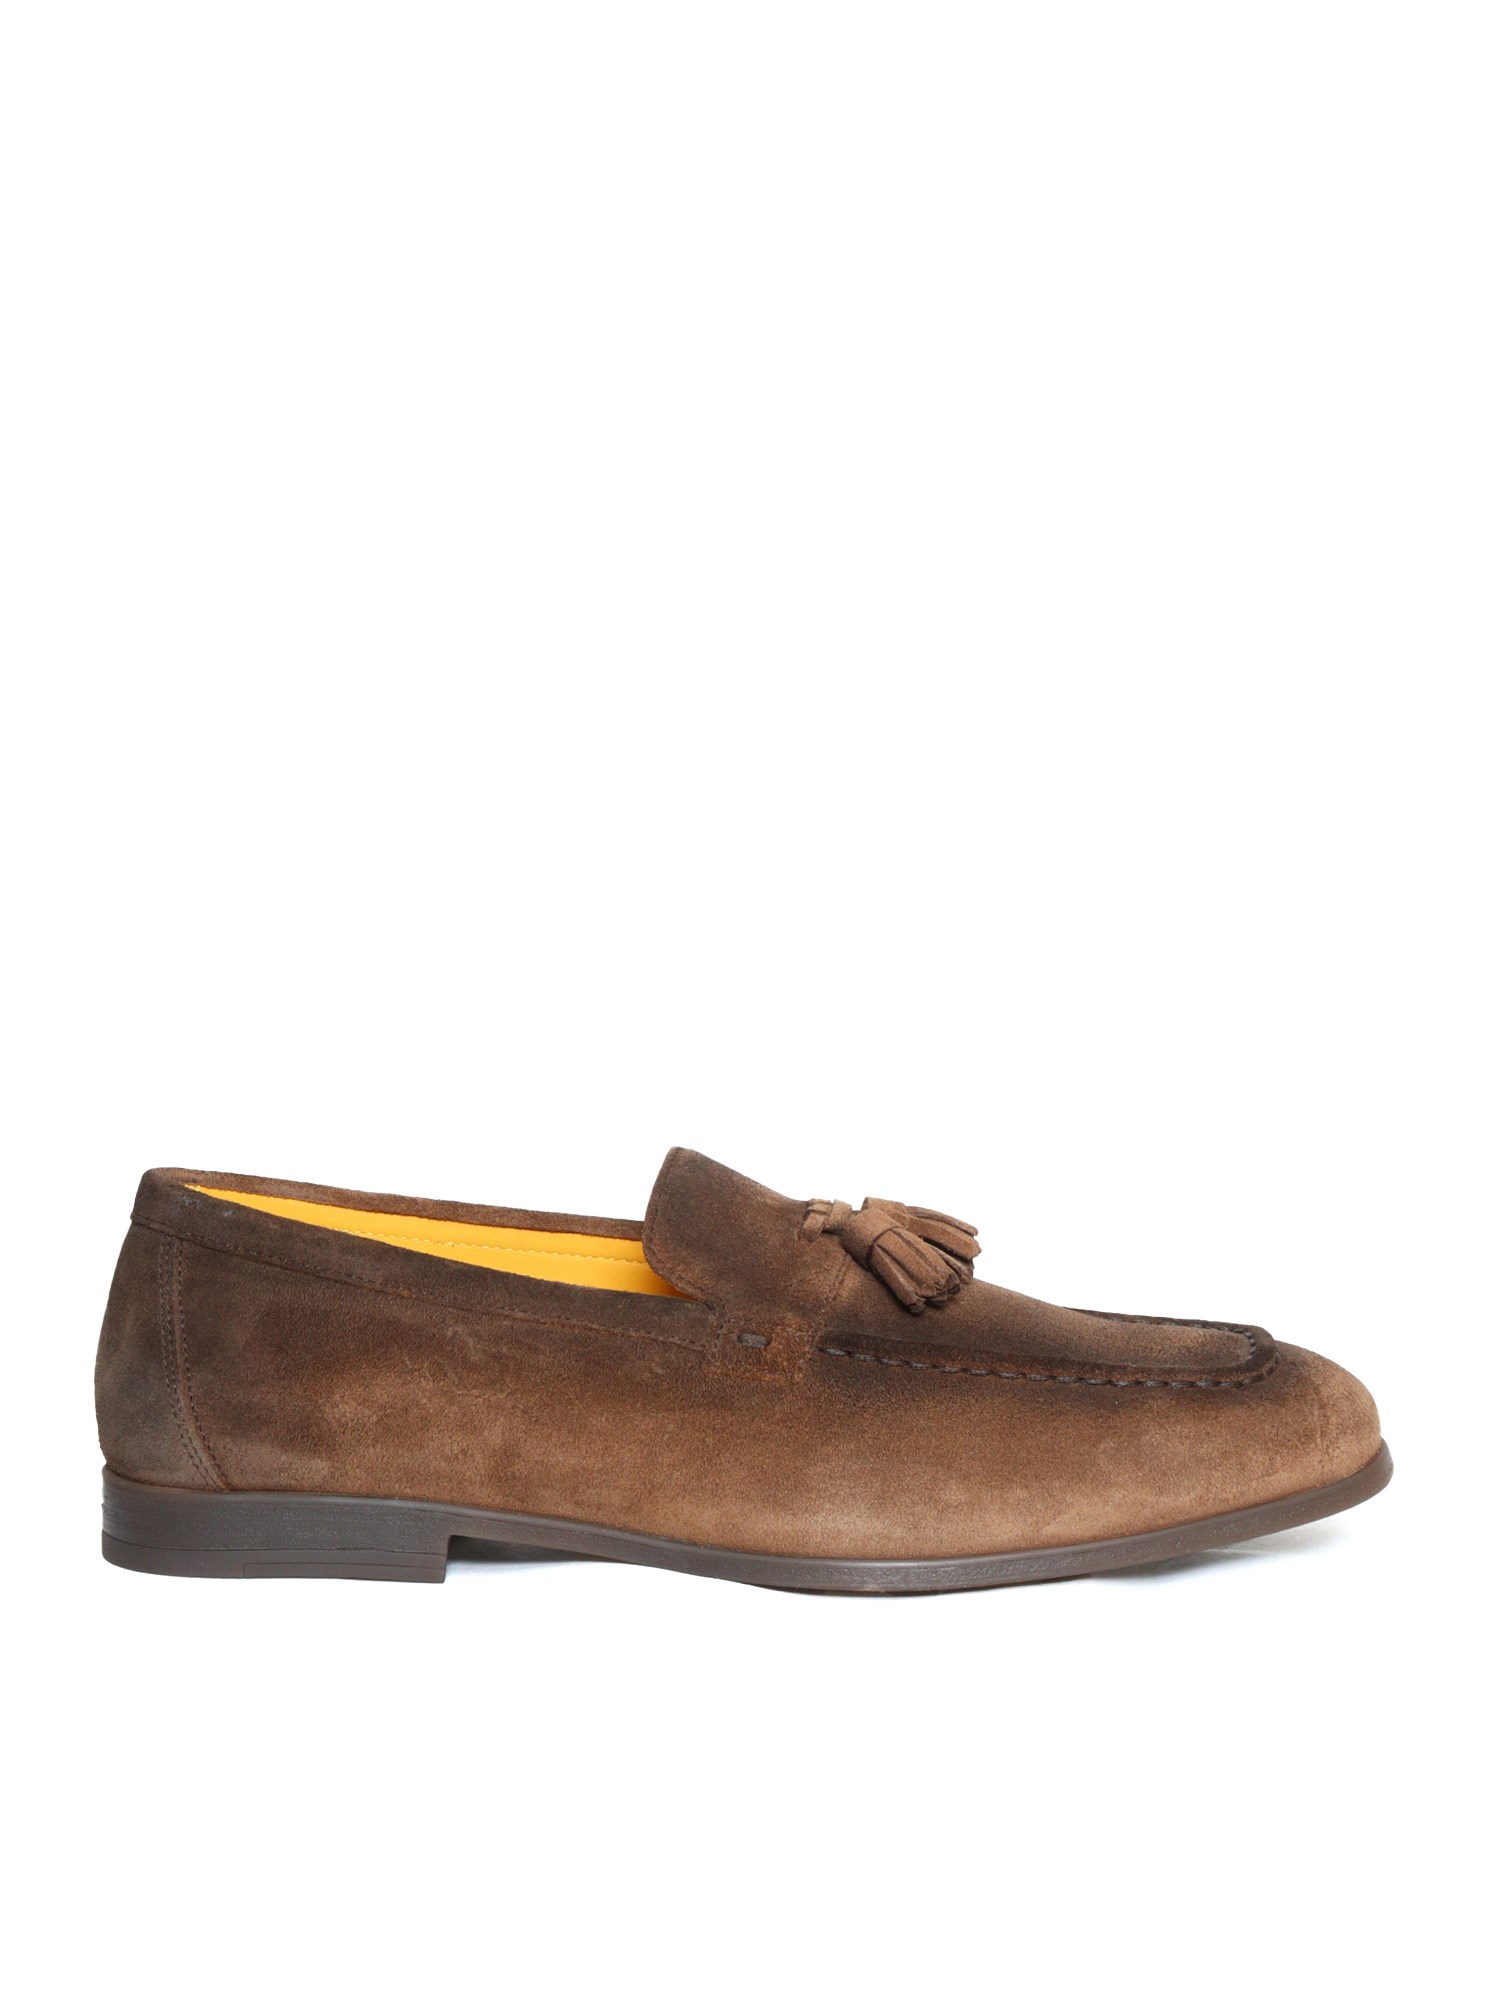 Doucal's Brown Suede Loafers